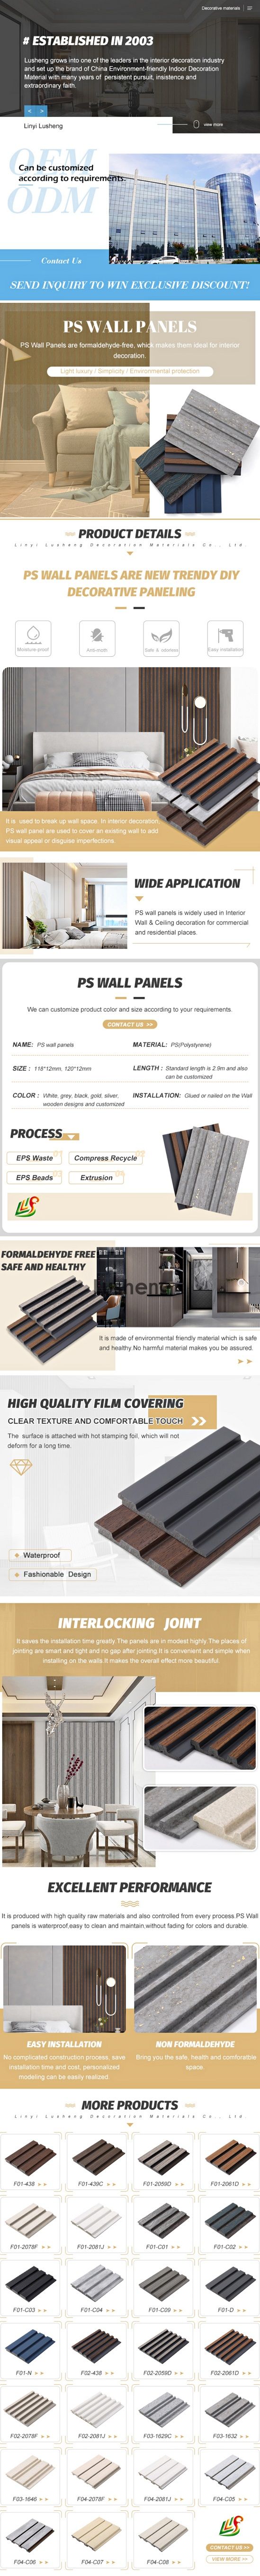 eco friendly 3d wood wall panel ps wall panel black gold for home improvement(图2)